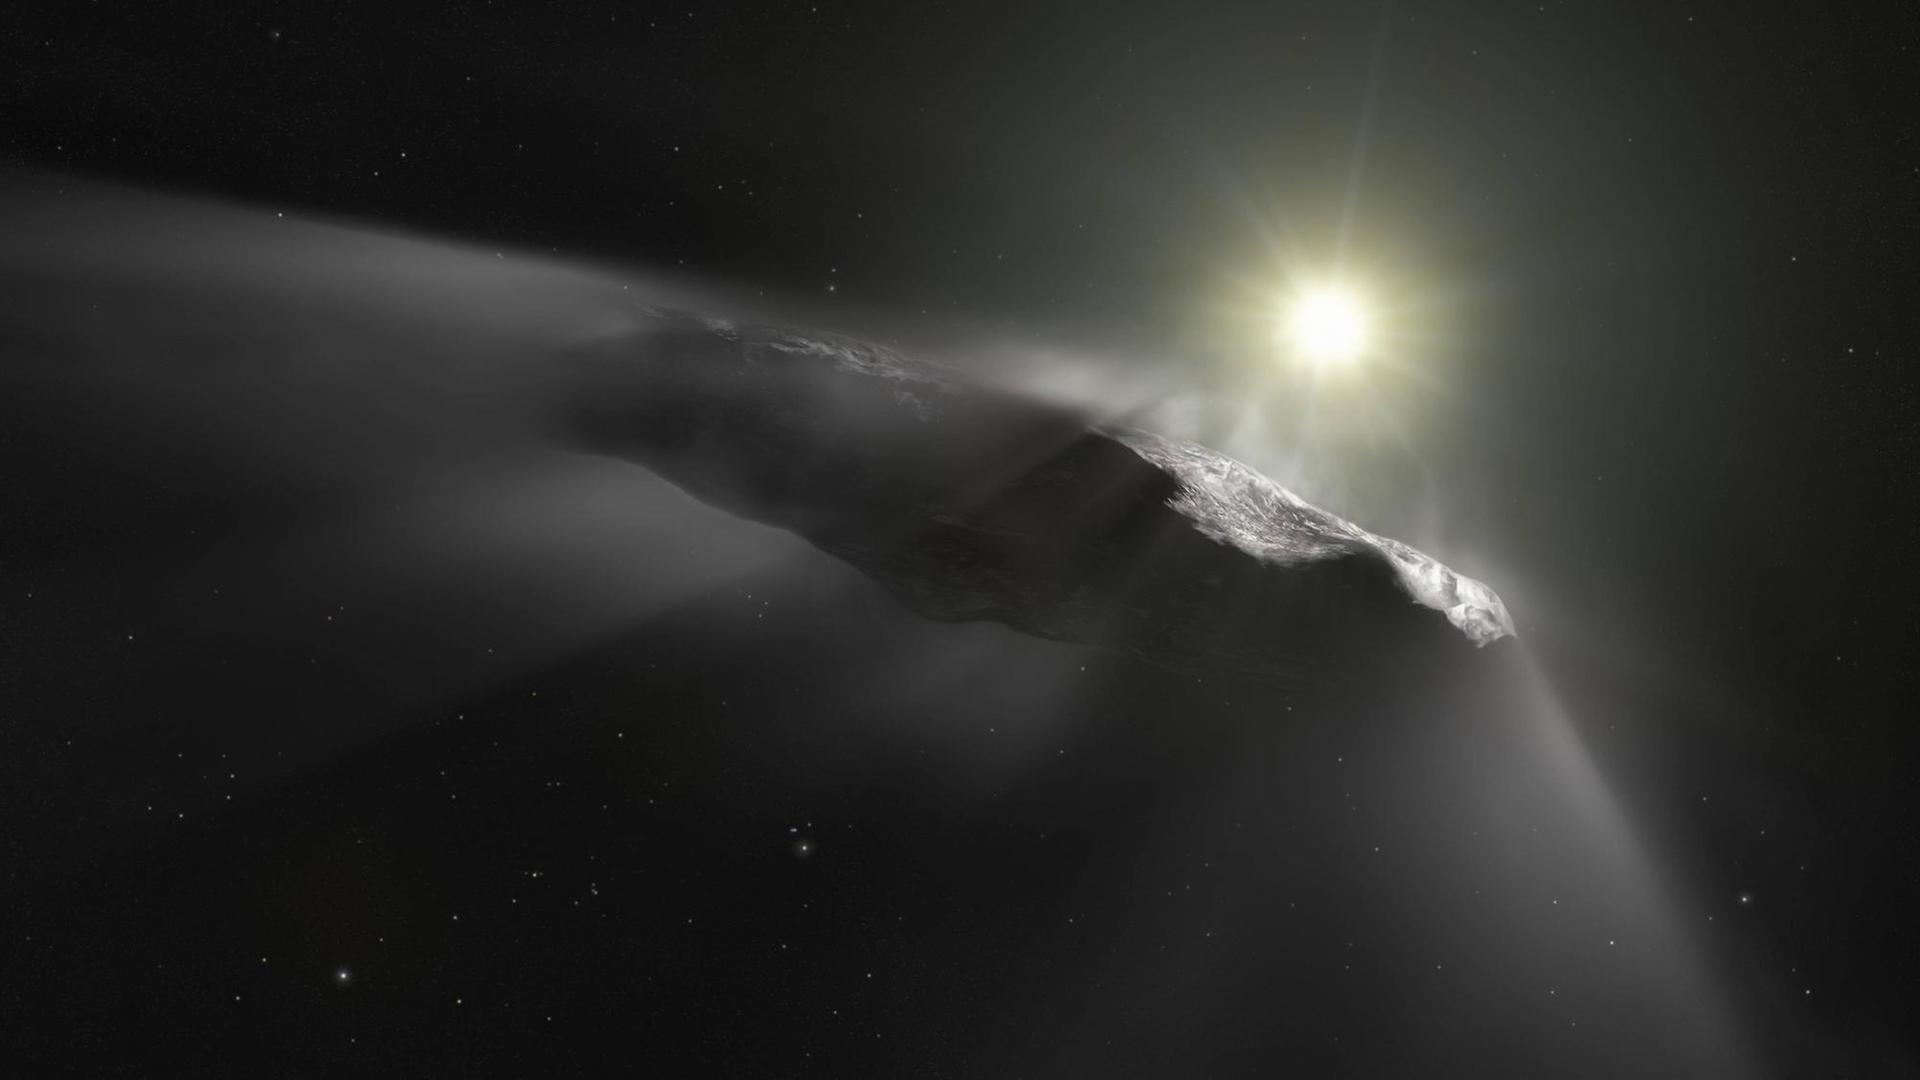 June 19, 2019 - France - Artist impression shows the first interstellar object discovered in the Solar System Oumuamua. Comet Interceptor has been selected as ESA s new fast-class mission in its Cosmic Vision Program. Comprising three spacecraft, it will be the first to visit a truly pristine comet or other interstellar object that is only just starting its journey into the inner Solar System. The mission will travel to an as-yet undiscovered comet, making a flyby of the chosen target when it is on the approach to Earth s orbit. Its three spacecraft will perform simultaneous observations from multiple points around the comet, creating a 3D profile of a dynamically new object that contains unprocessed material surviving from the dawn of the Solar System. France PUBLICATIONxINxGERxSUIxAUTxONLY - ZUMAz03_ 20190619_sha_z03_375 Copyright: xHubblex